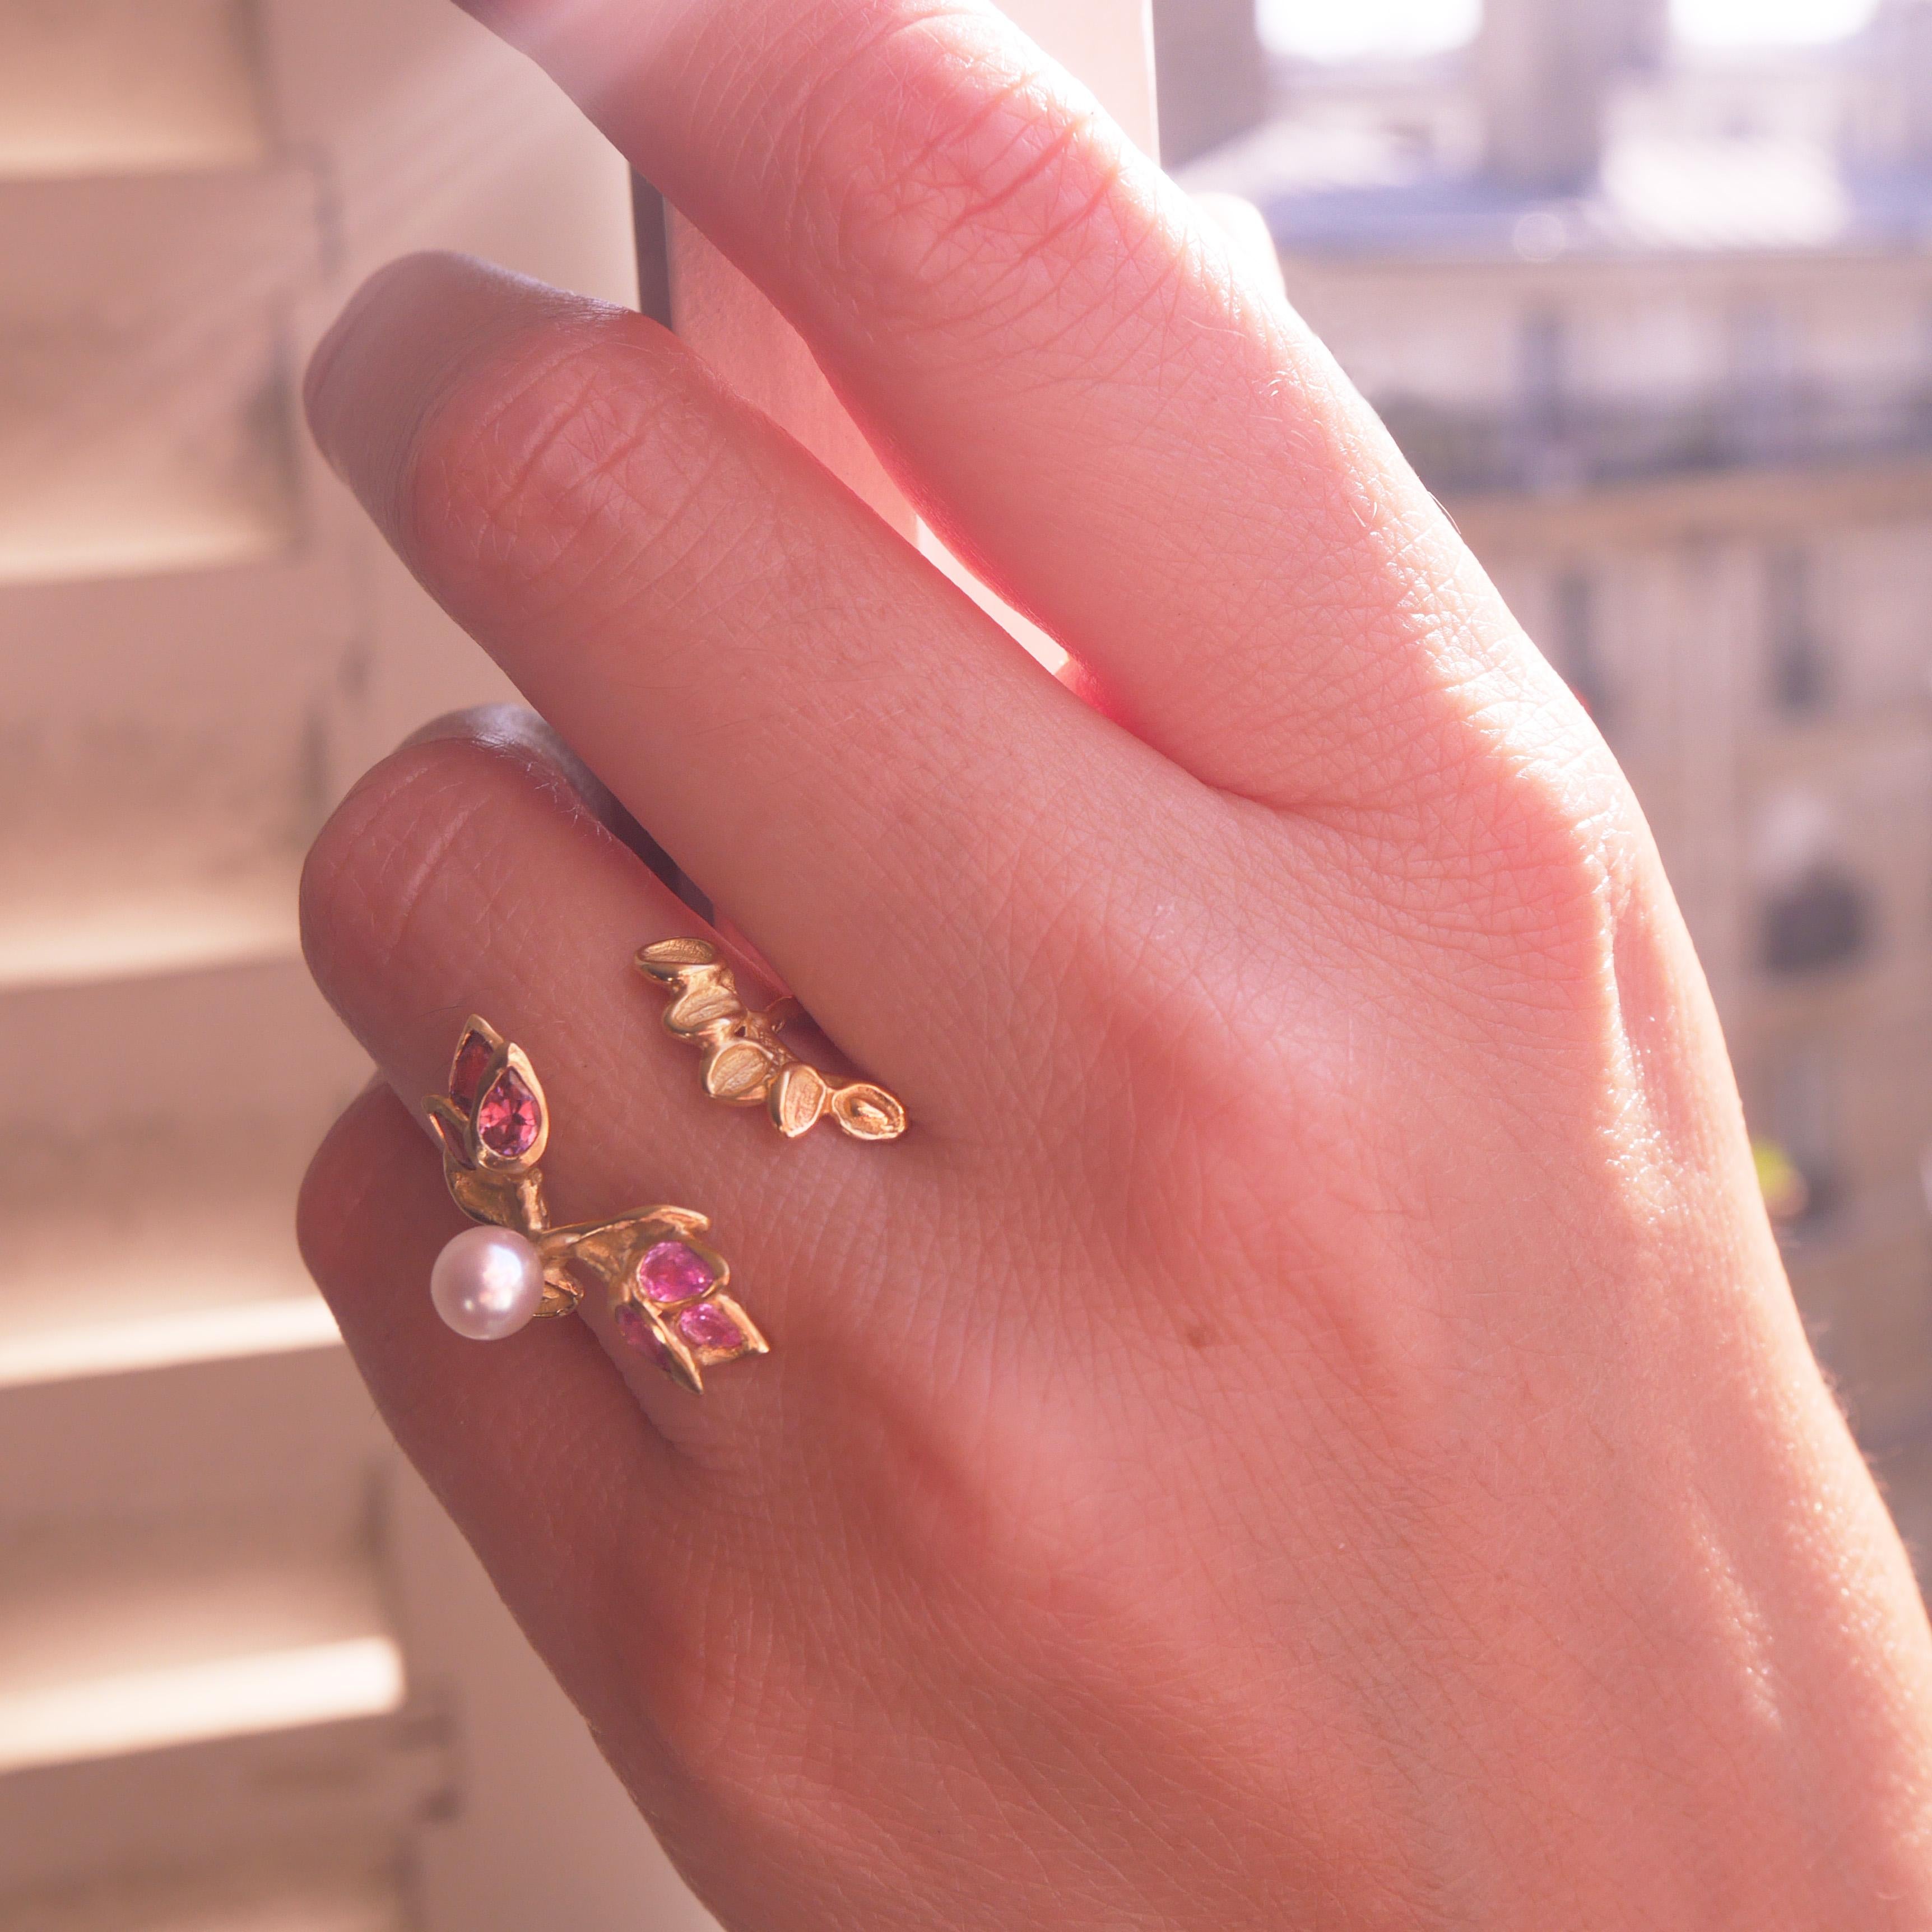 This unique sculptured handcrafted ring is made in 18 Karat yellow gold approximately 5 grams, it is designed with an elegant open silhouette set with pink tourmalines, pink sapphires and an Akoya pearl.
French size 51  / 5 US size.
It can be made